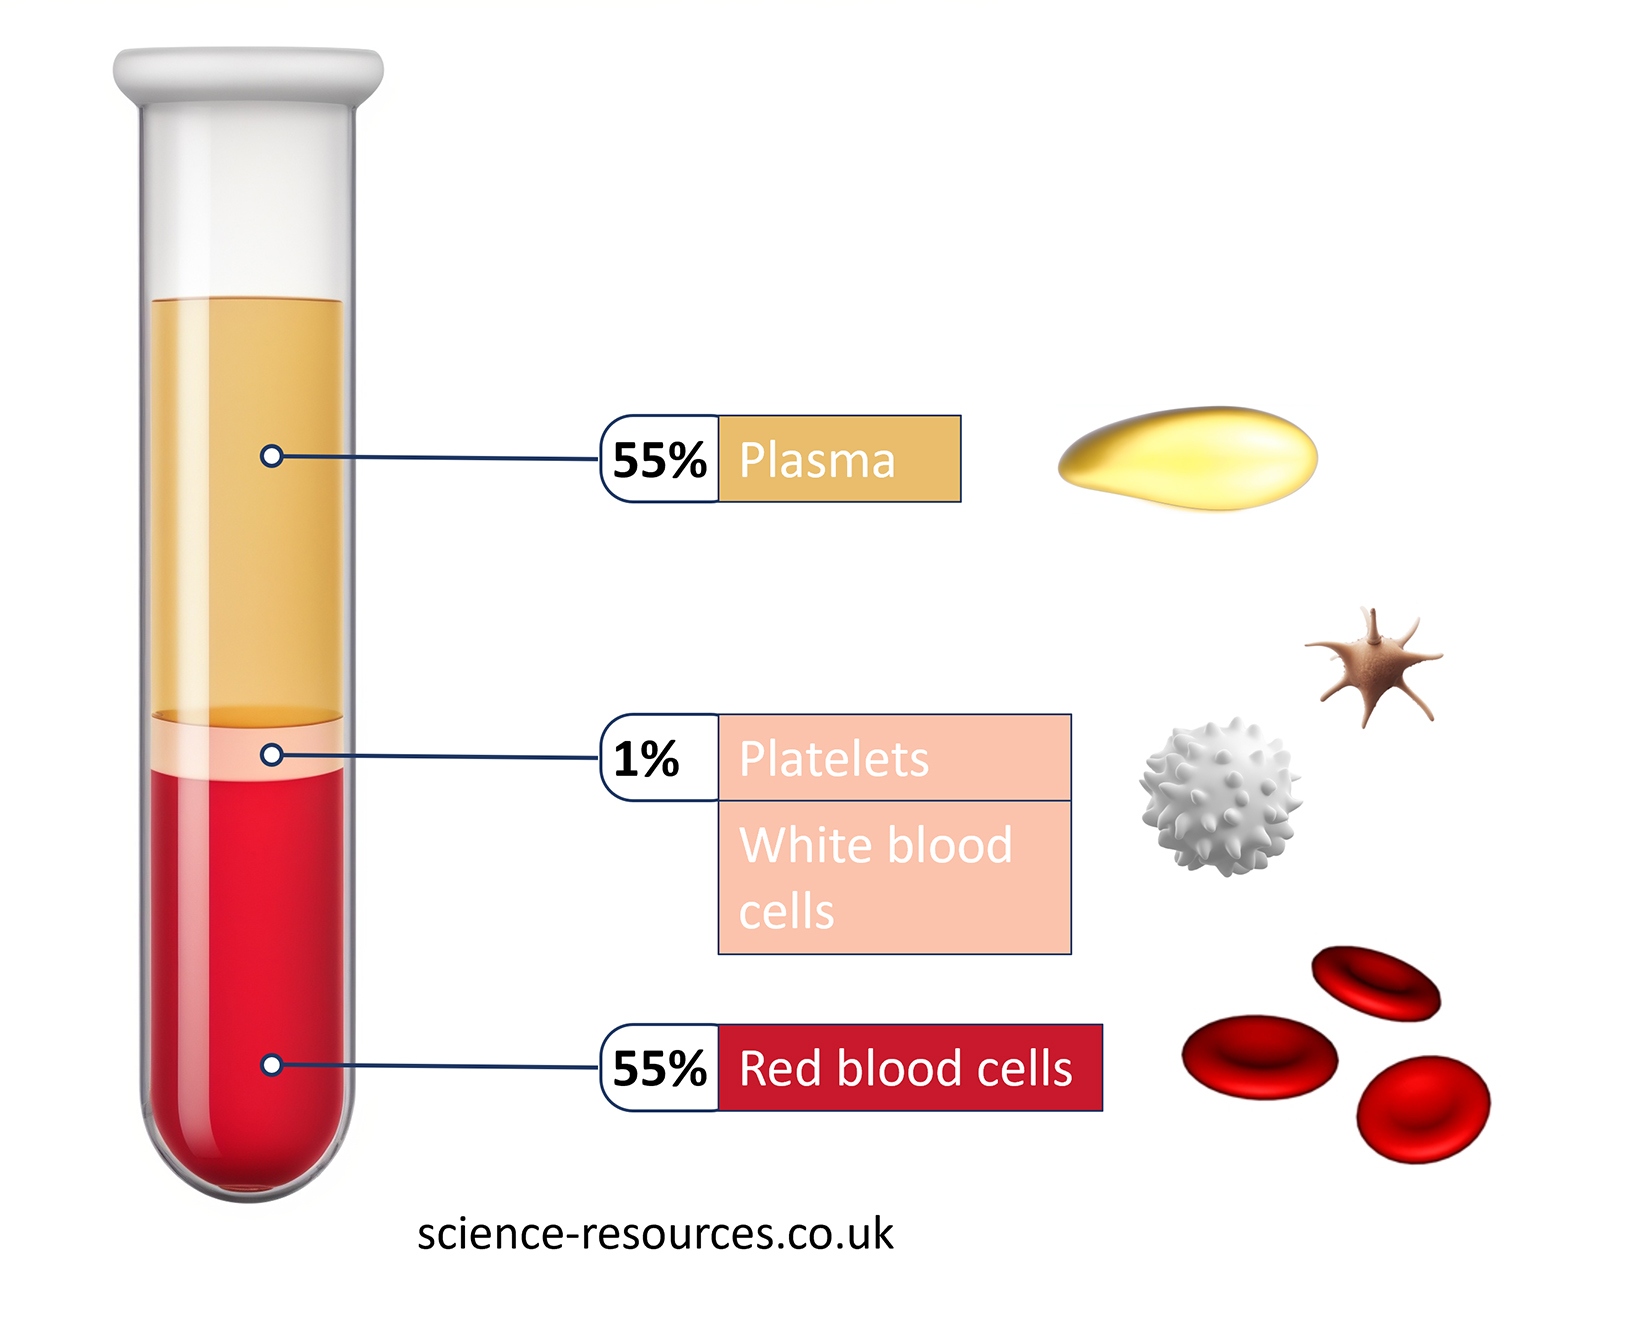 Components of the blood (shown as percentages).